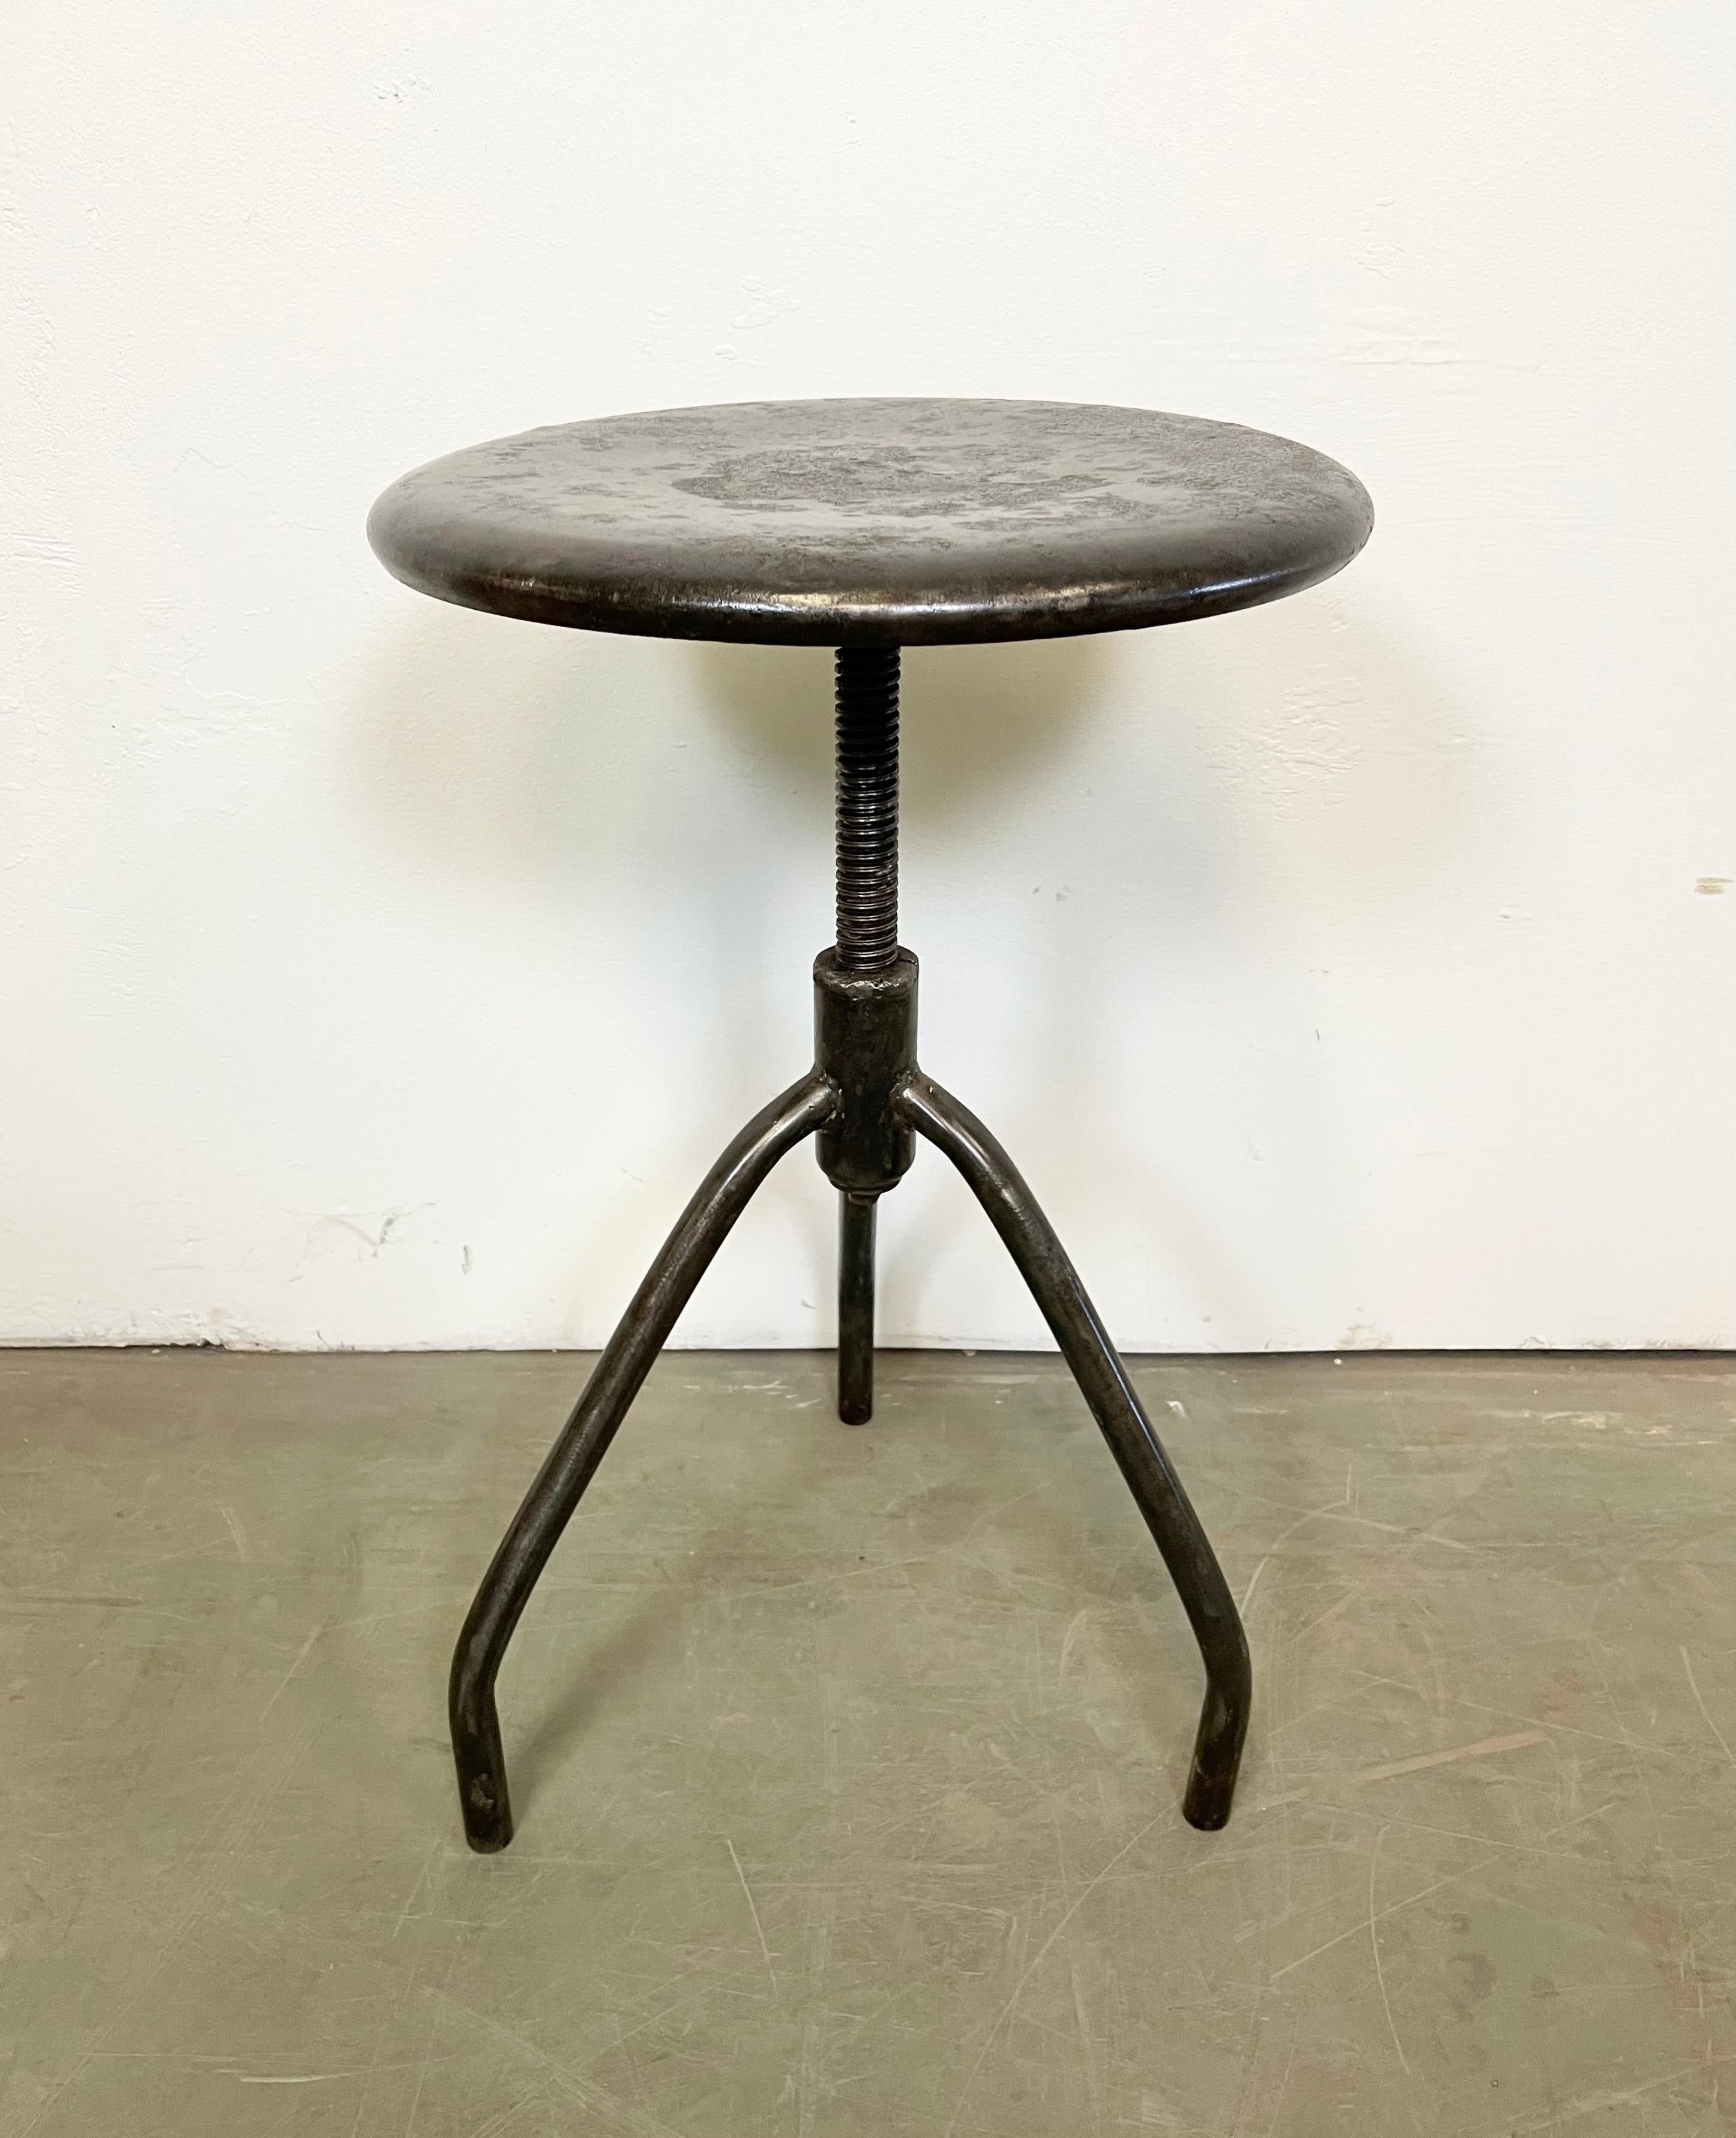 Industrial height adjustable stool made in former Czechoslovakia during the 1950s.
Min.- Max. height : 40 cm - 53 cm.
Seat diameter : 34 cm.
Weight. : 4 kg.